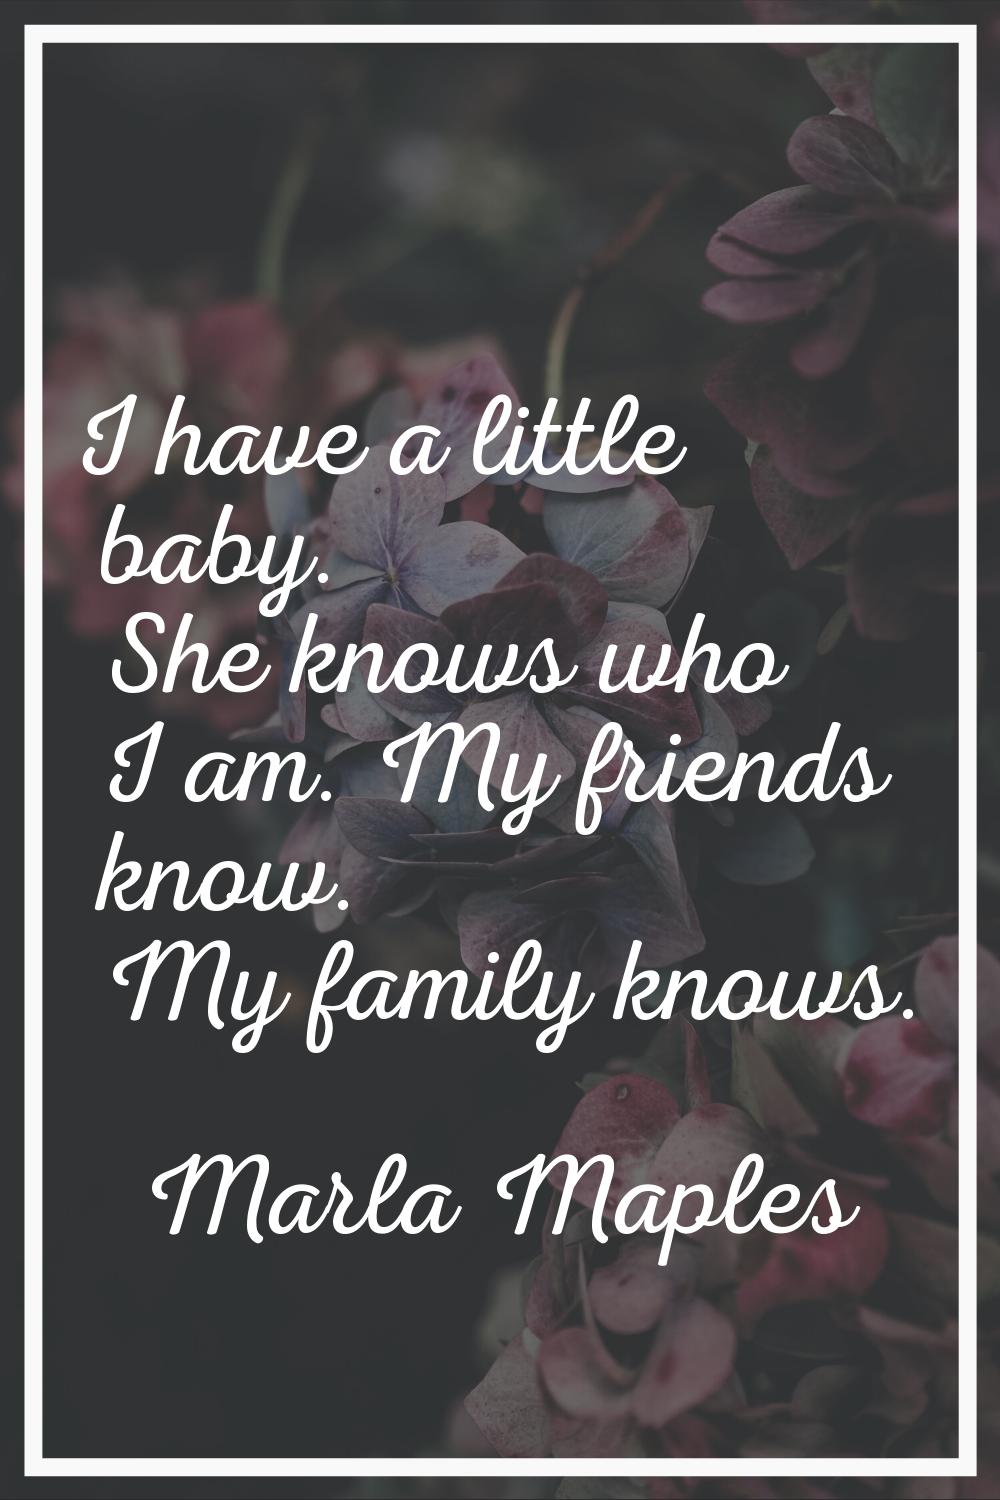 I have a little baby. She knows who I am. My friends know. My family knows.